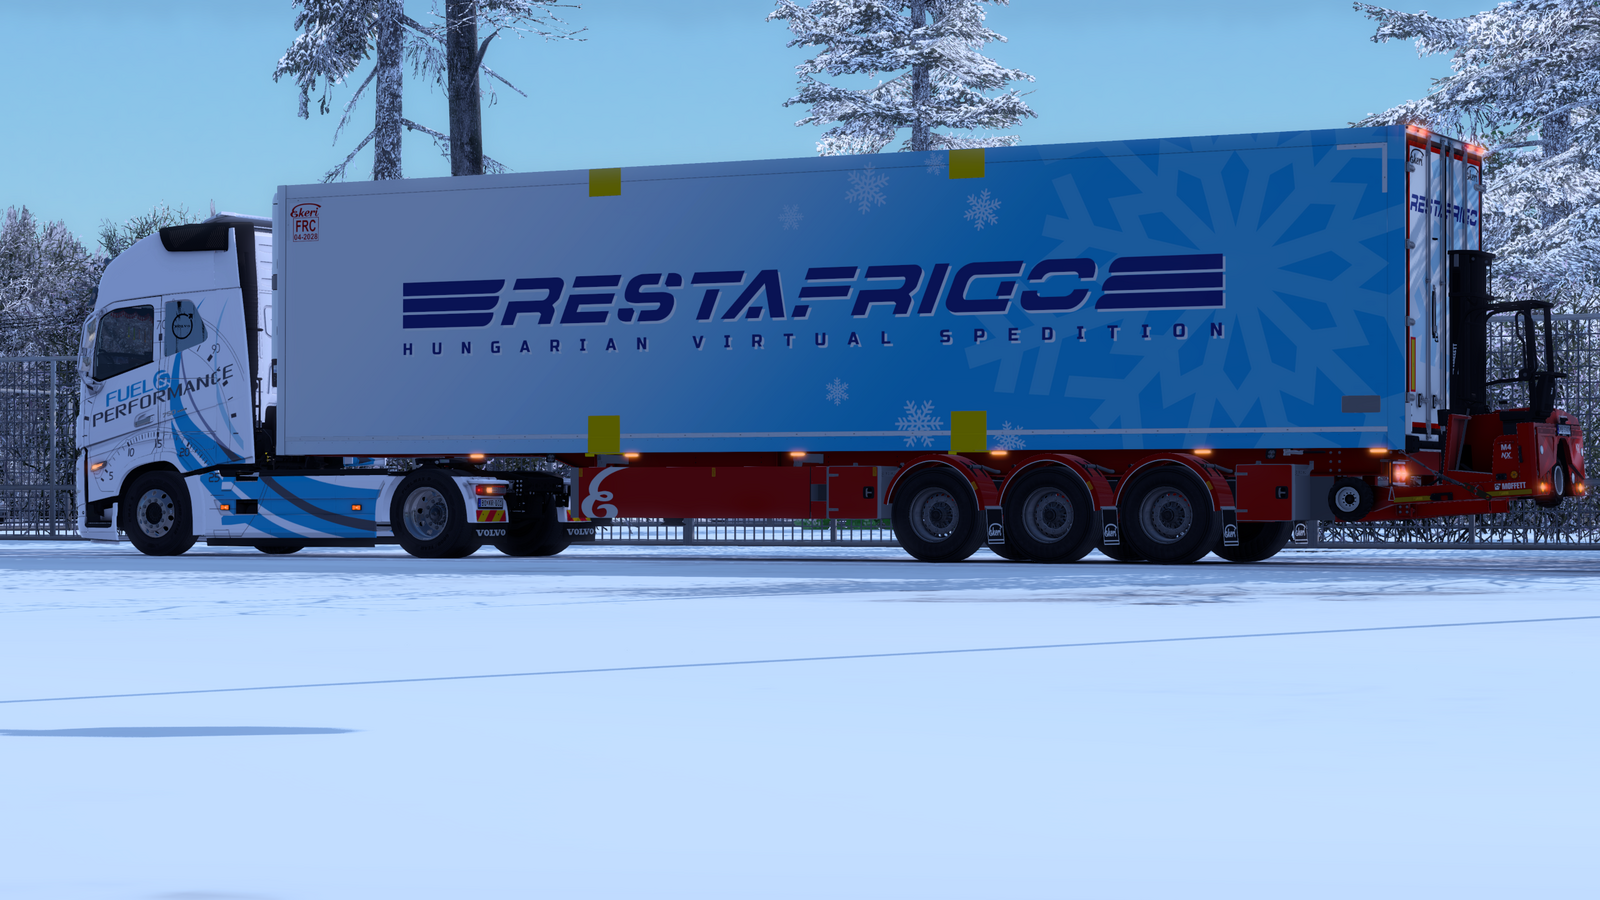 ets2_20221226_110954_00.png